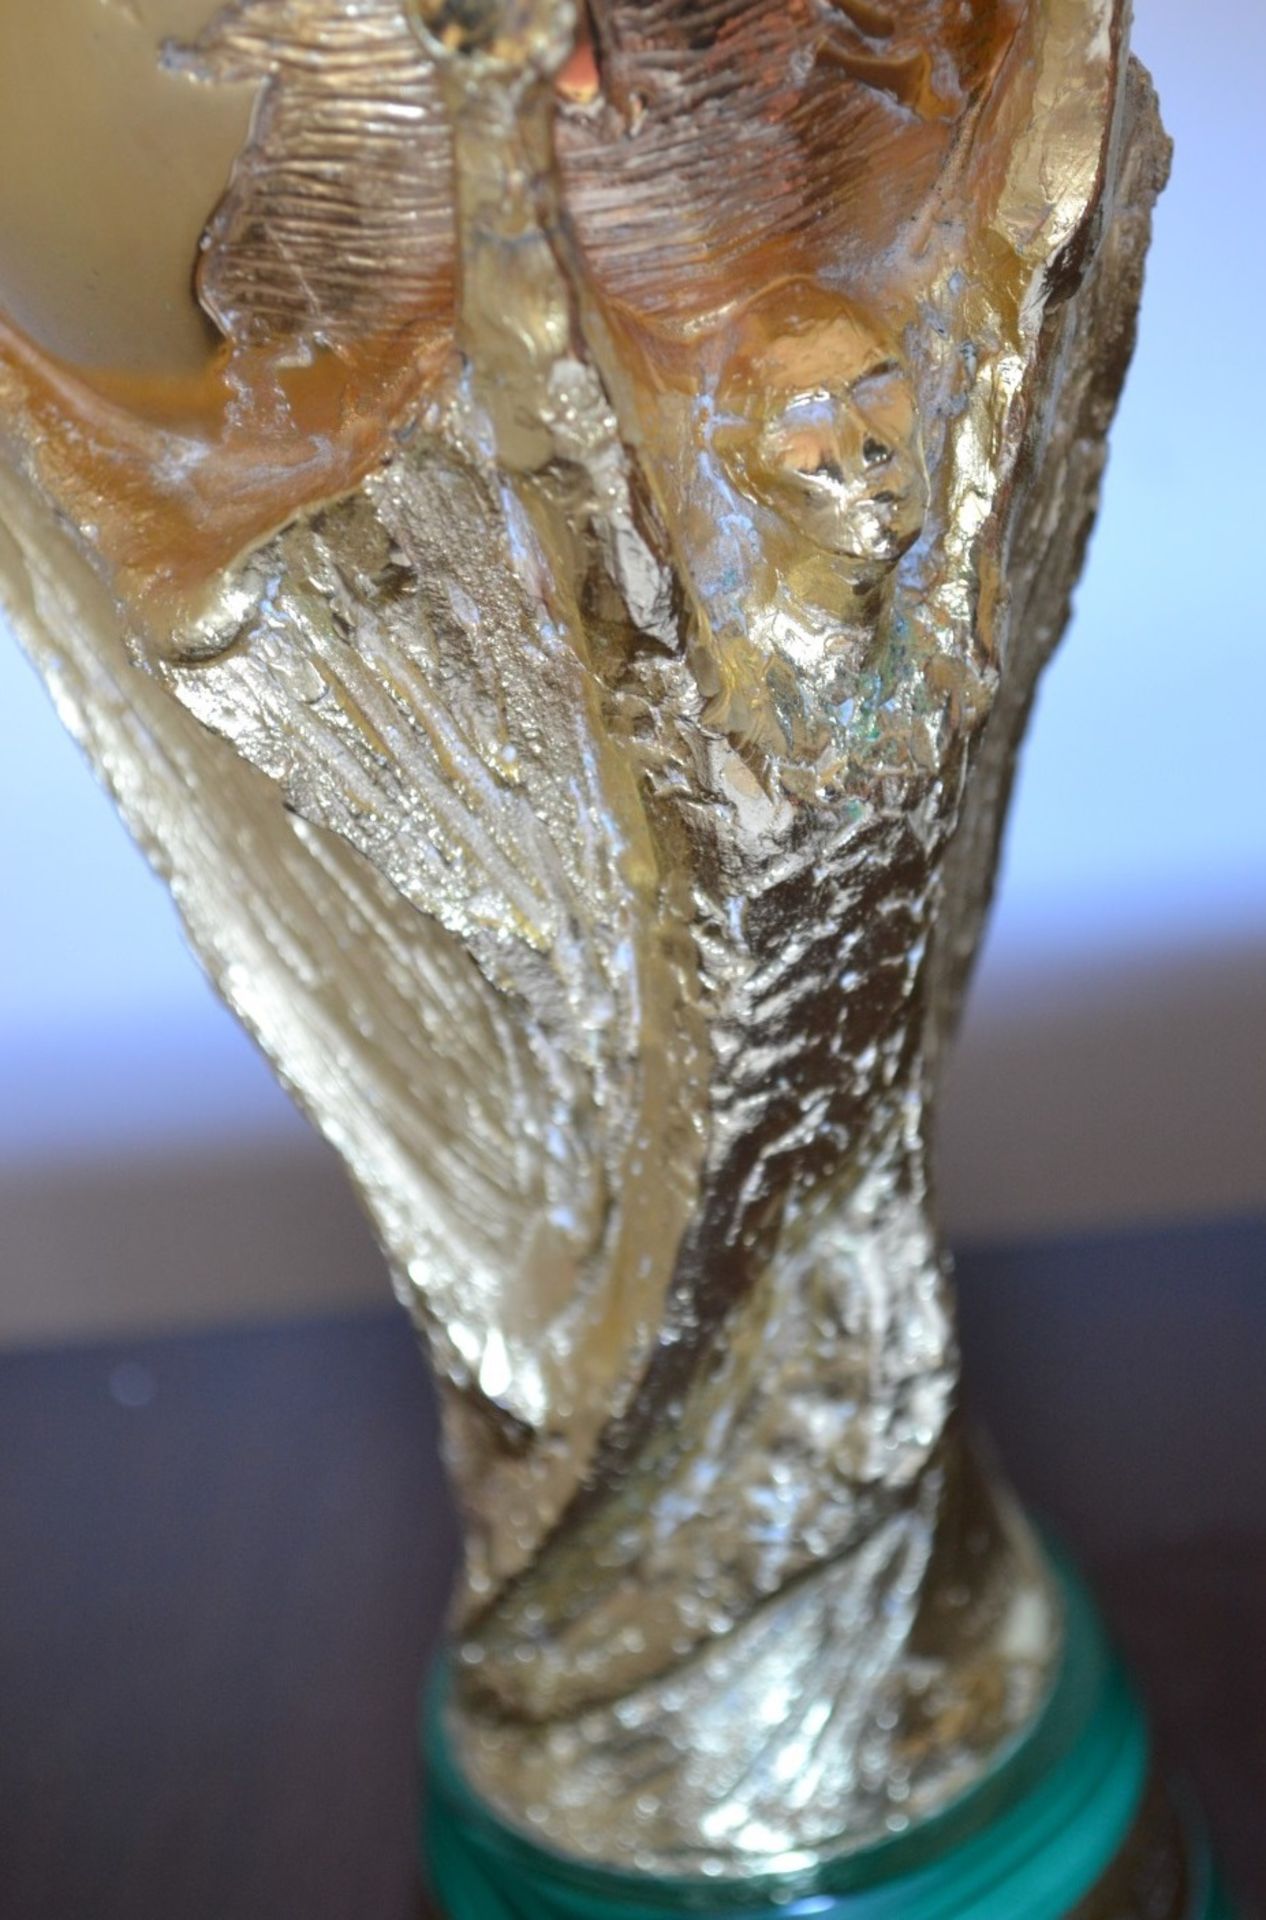 1 x Official World Cup 1:1.3 Scale 27cm Replica By Gerrard & Co. - Gold Plated - No.8 Of Only 10 - Image 9 of 16